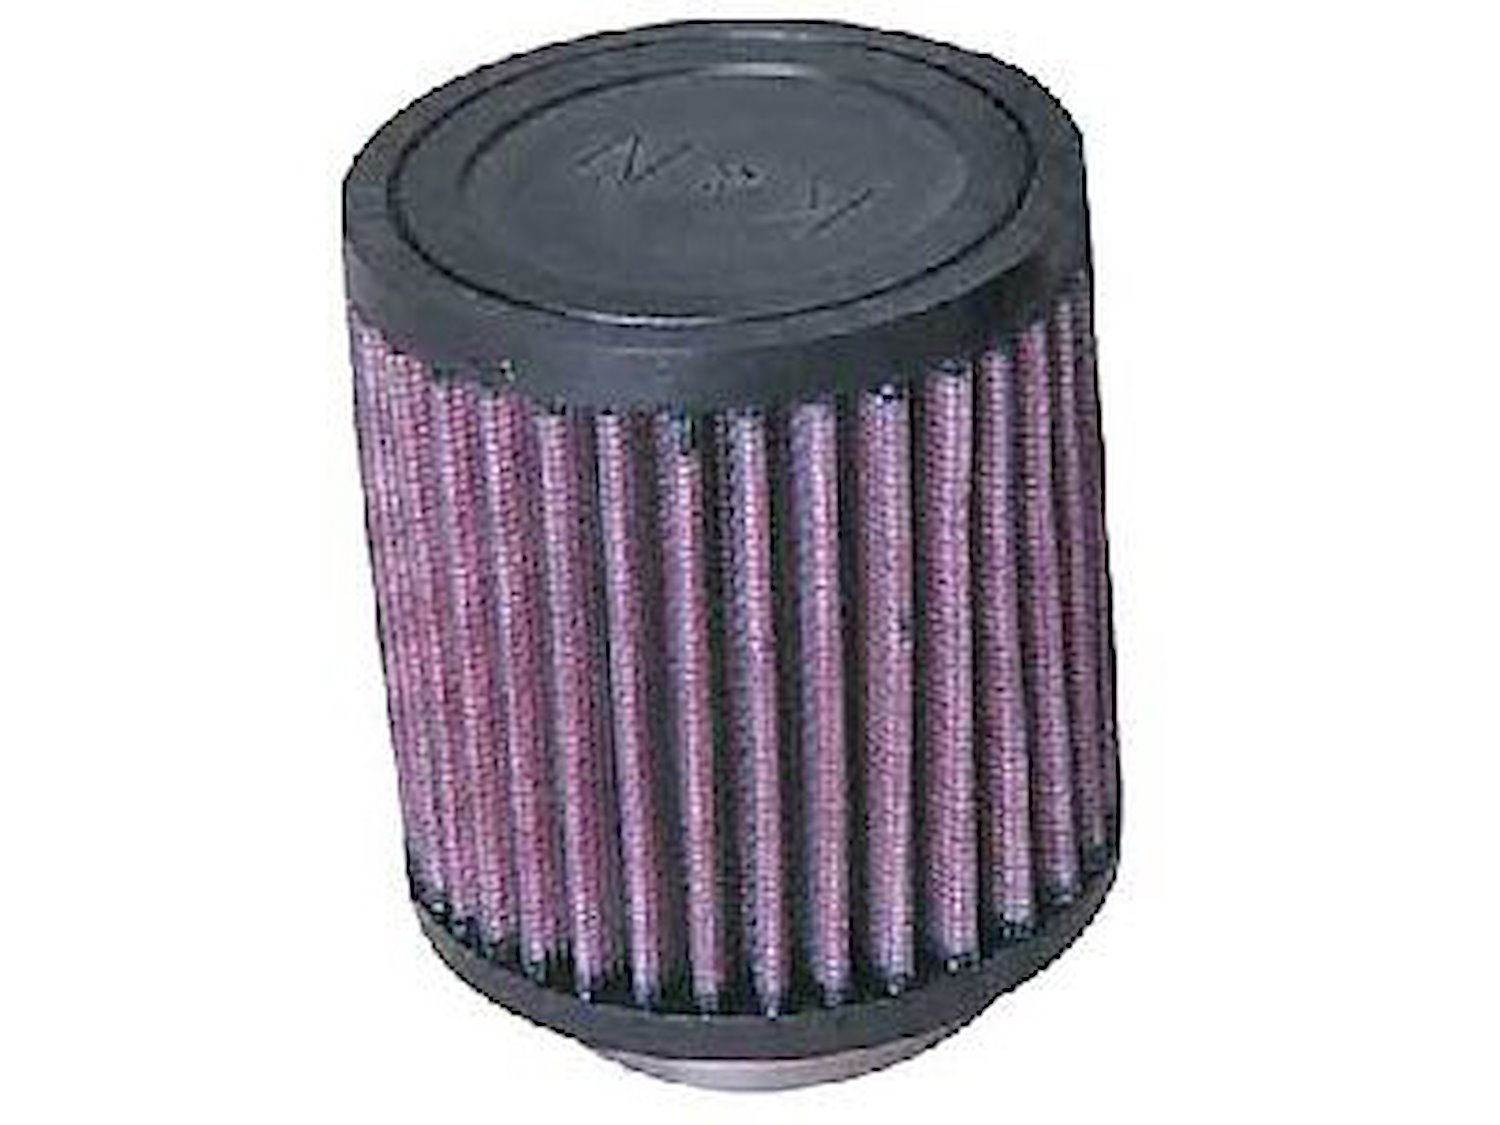 Round Straight Air Filter Flange Dia. (F): 2.063" (52 mm)